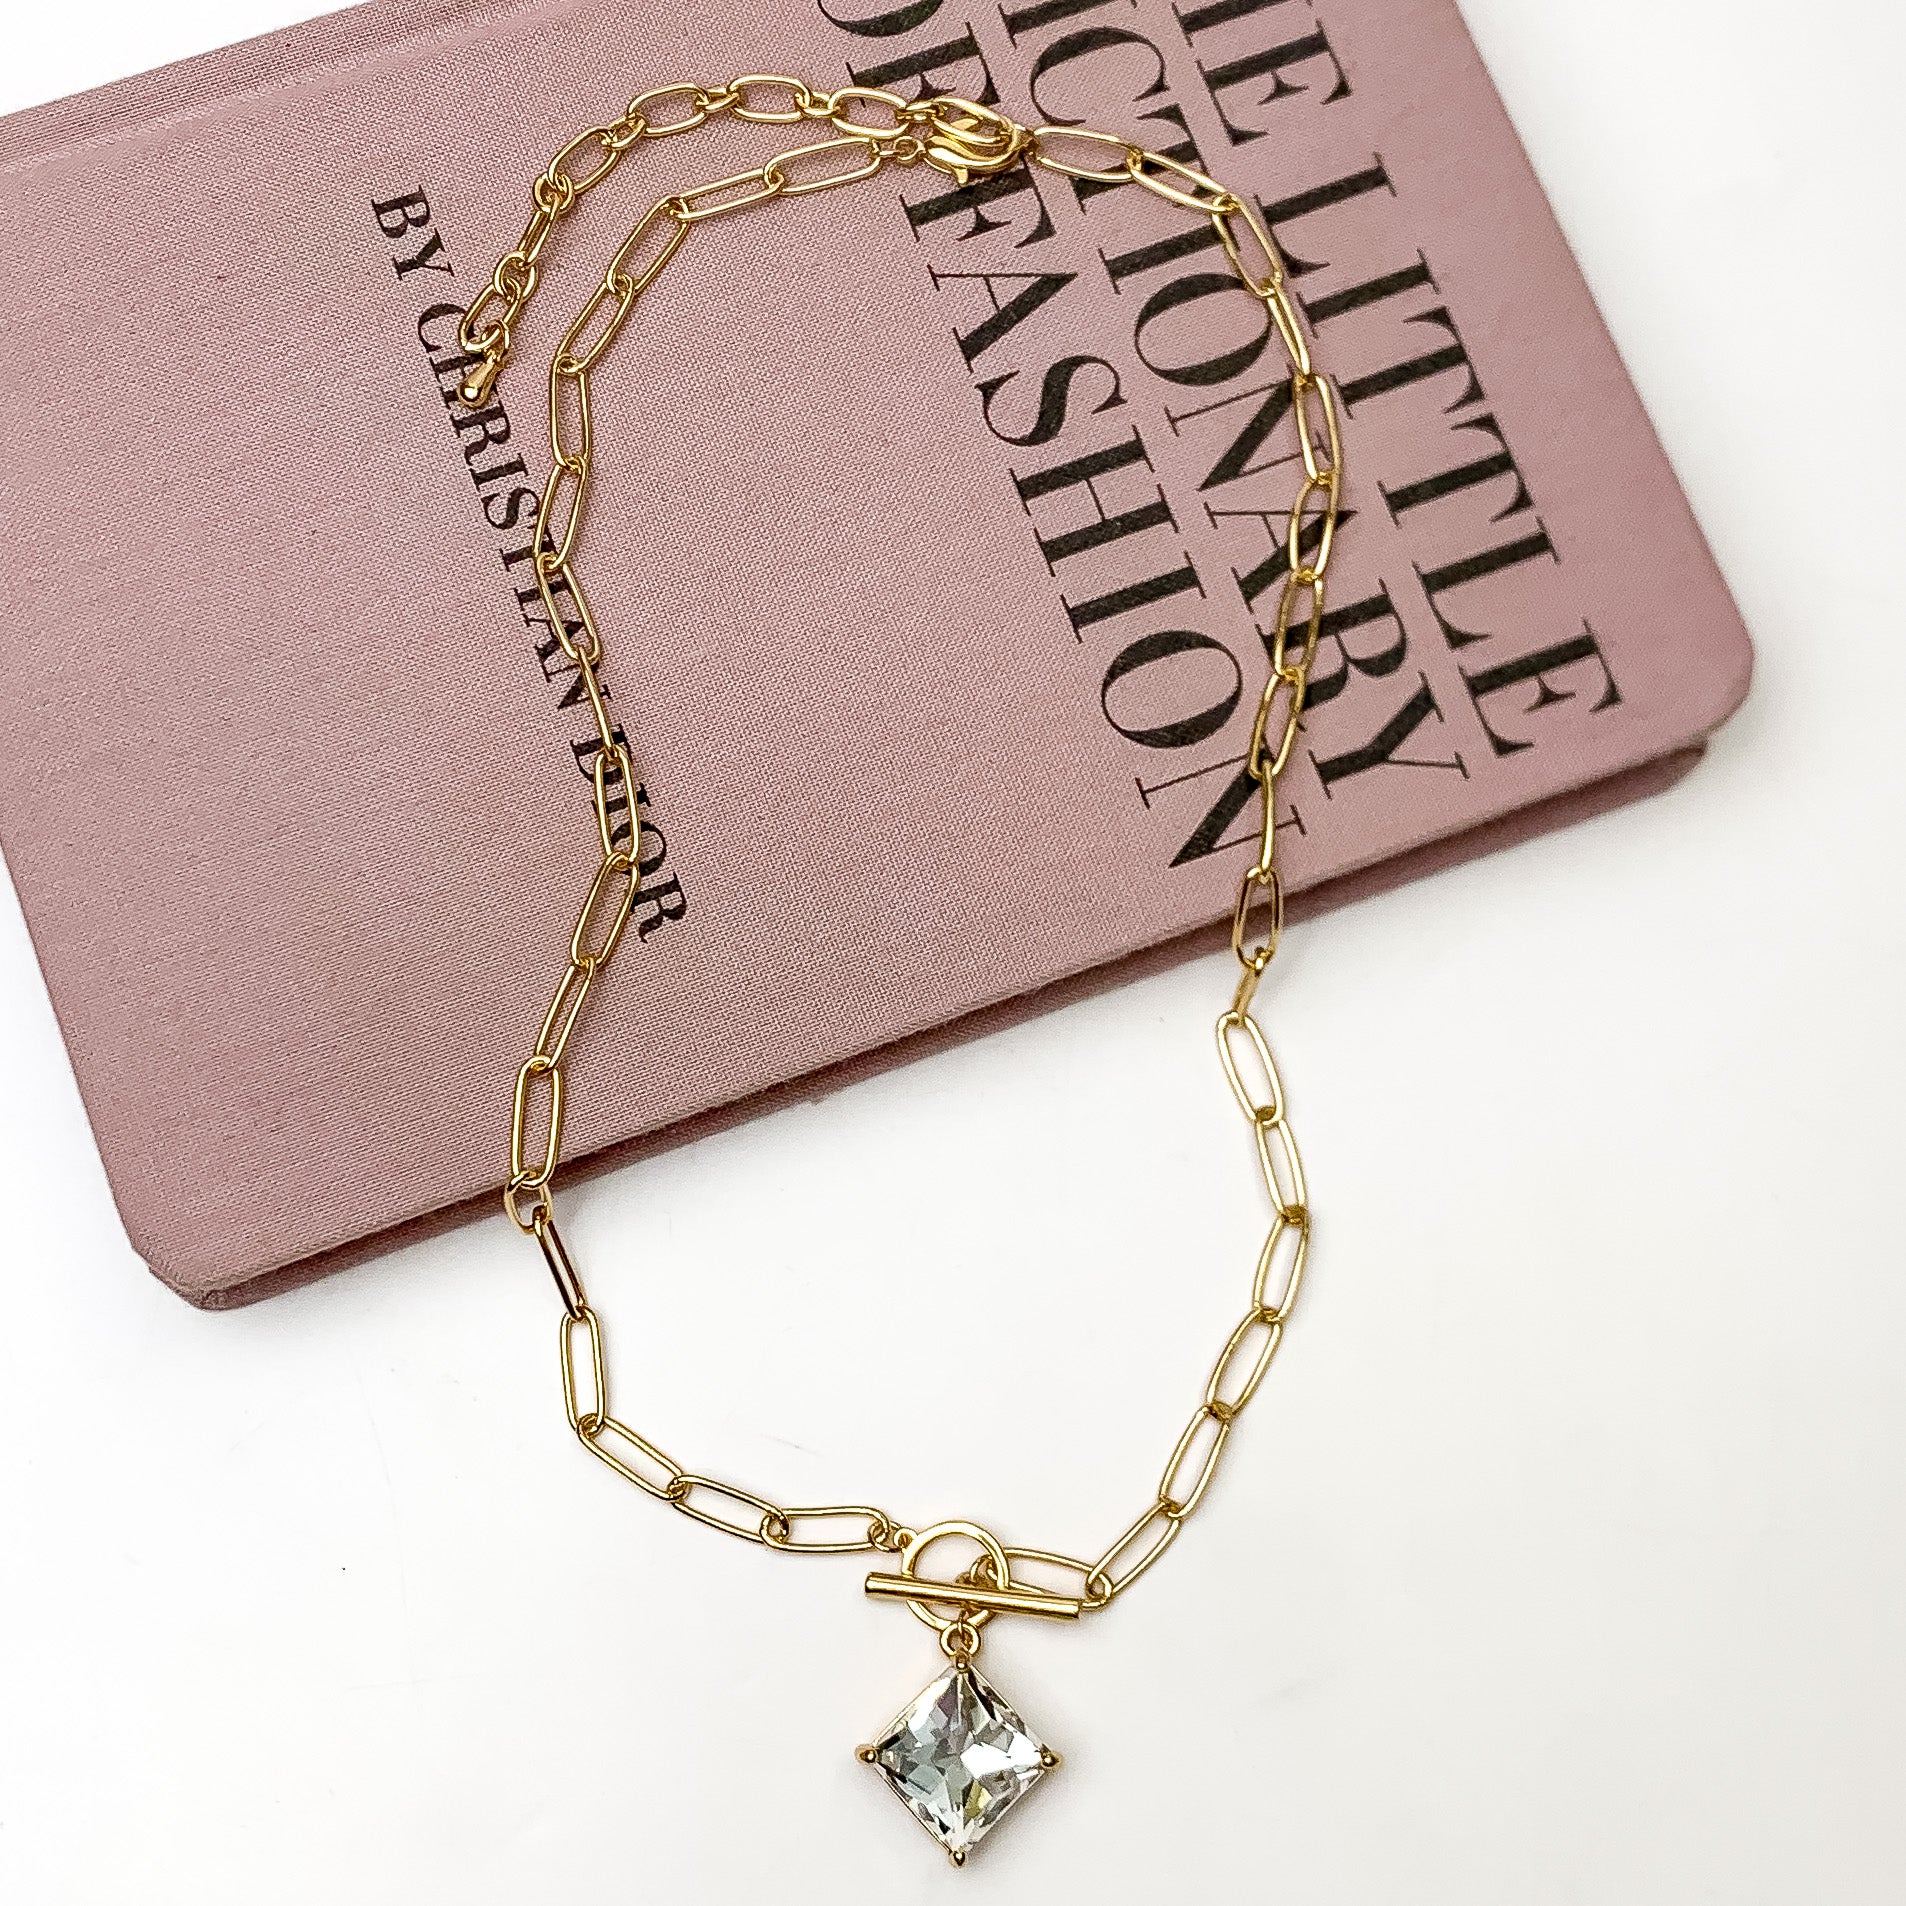 Pictured is a gold, chain necklace with a front toggle clasp and clear, square crystal charm. This necklace is pictured laying partially on a mauve book on a white background.  